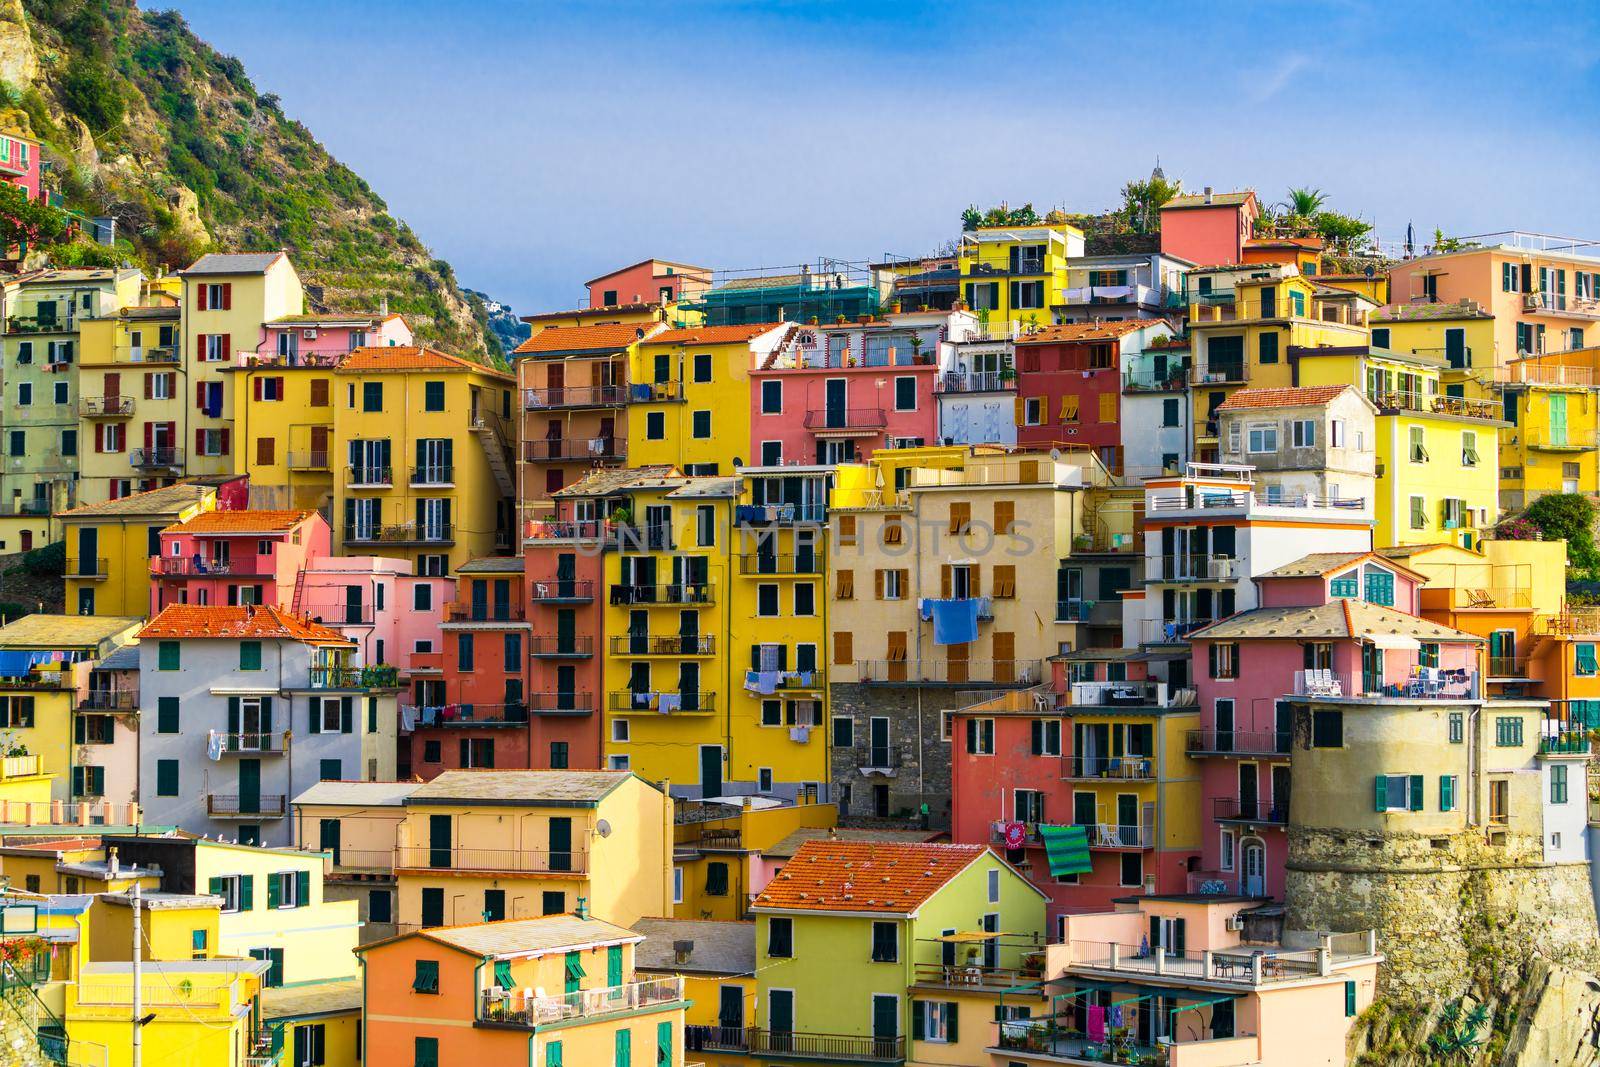 Colorful houses in Manarola, Cinque Terre - Italy by biancoblue